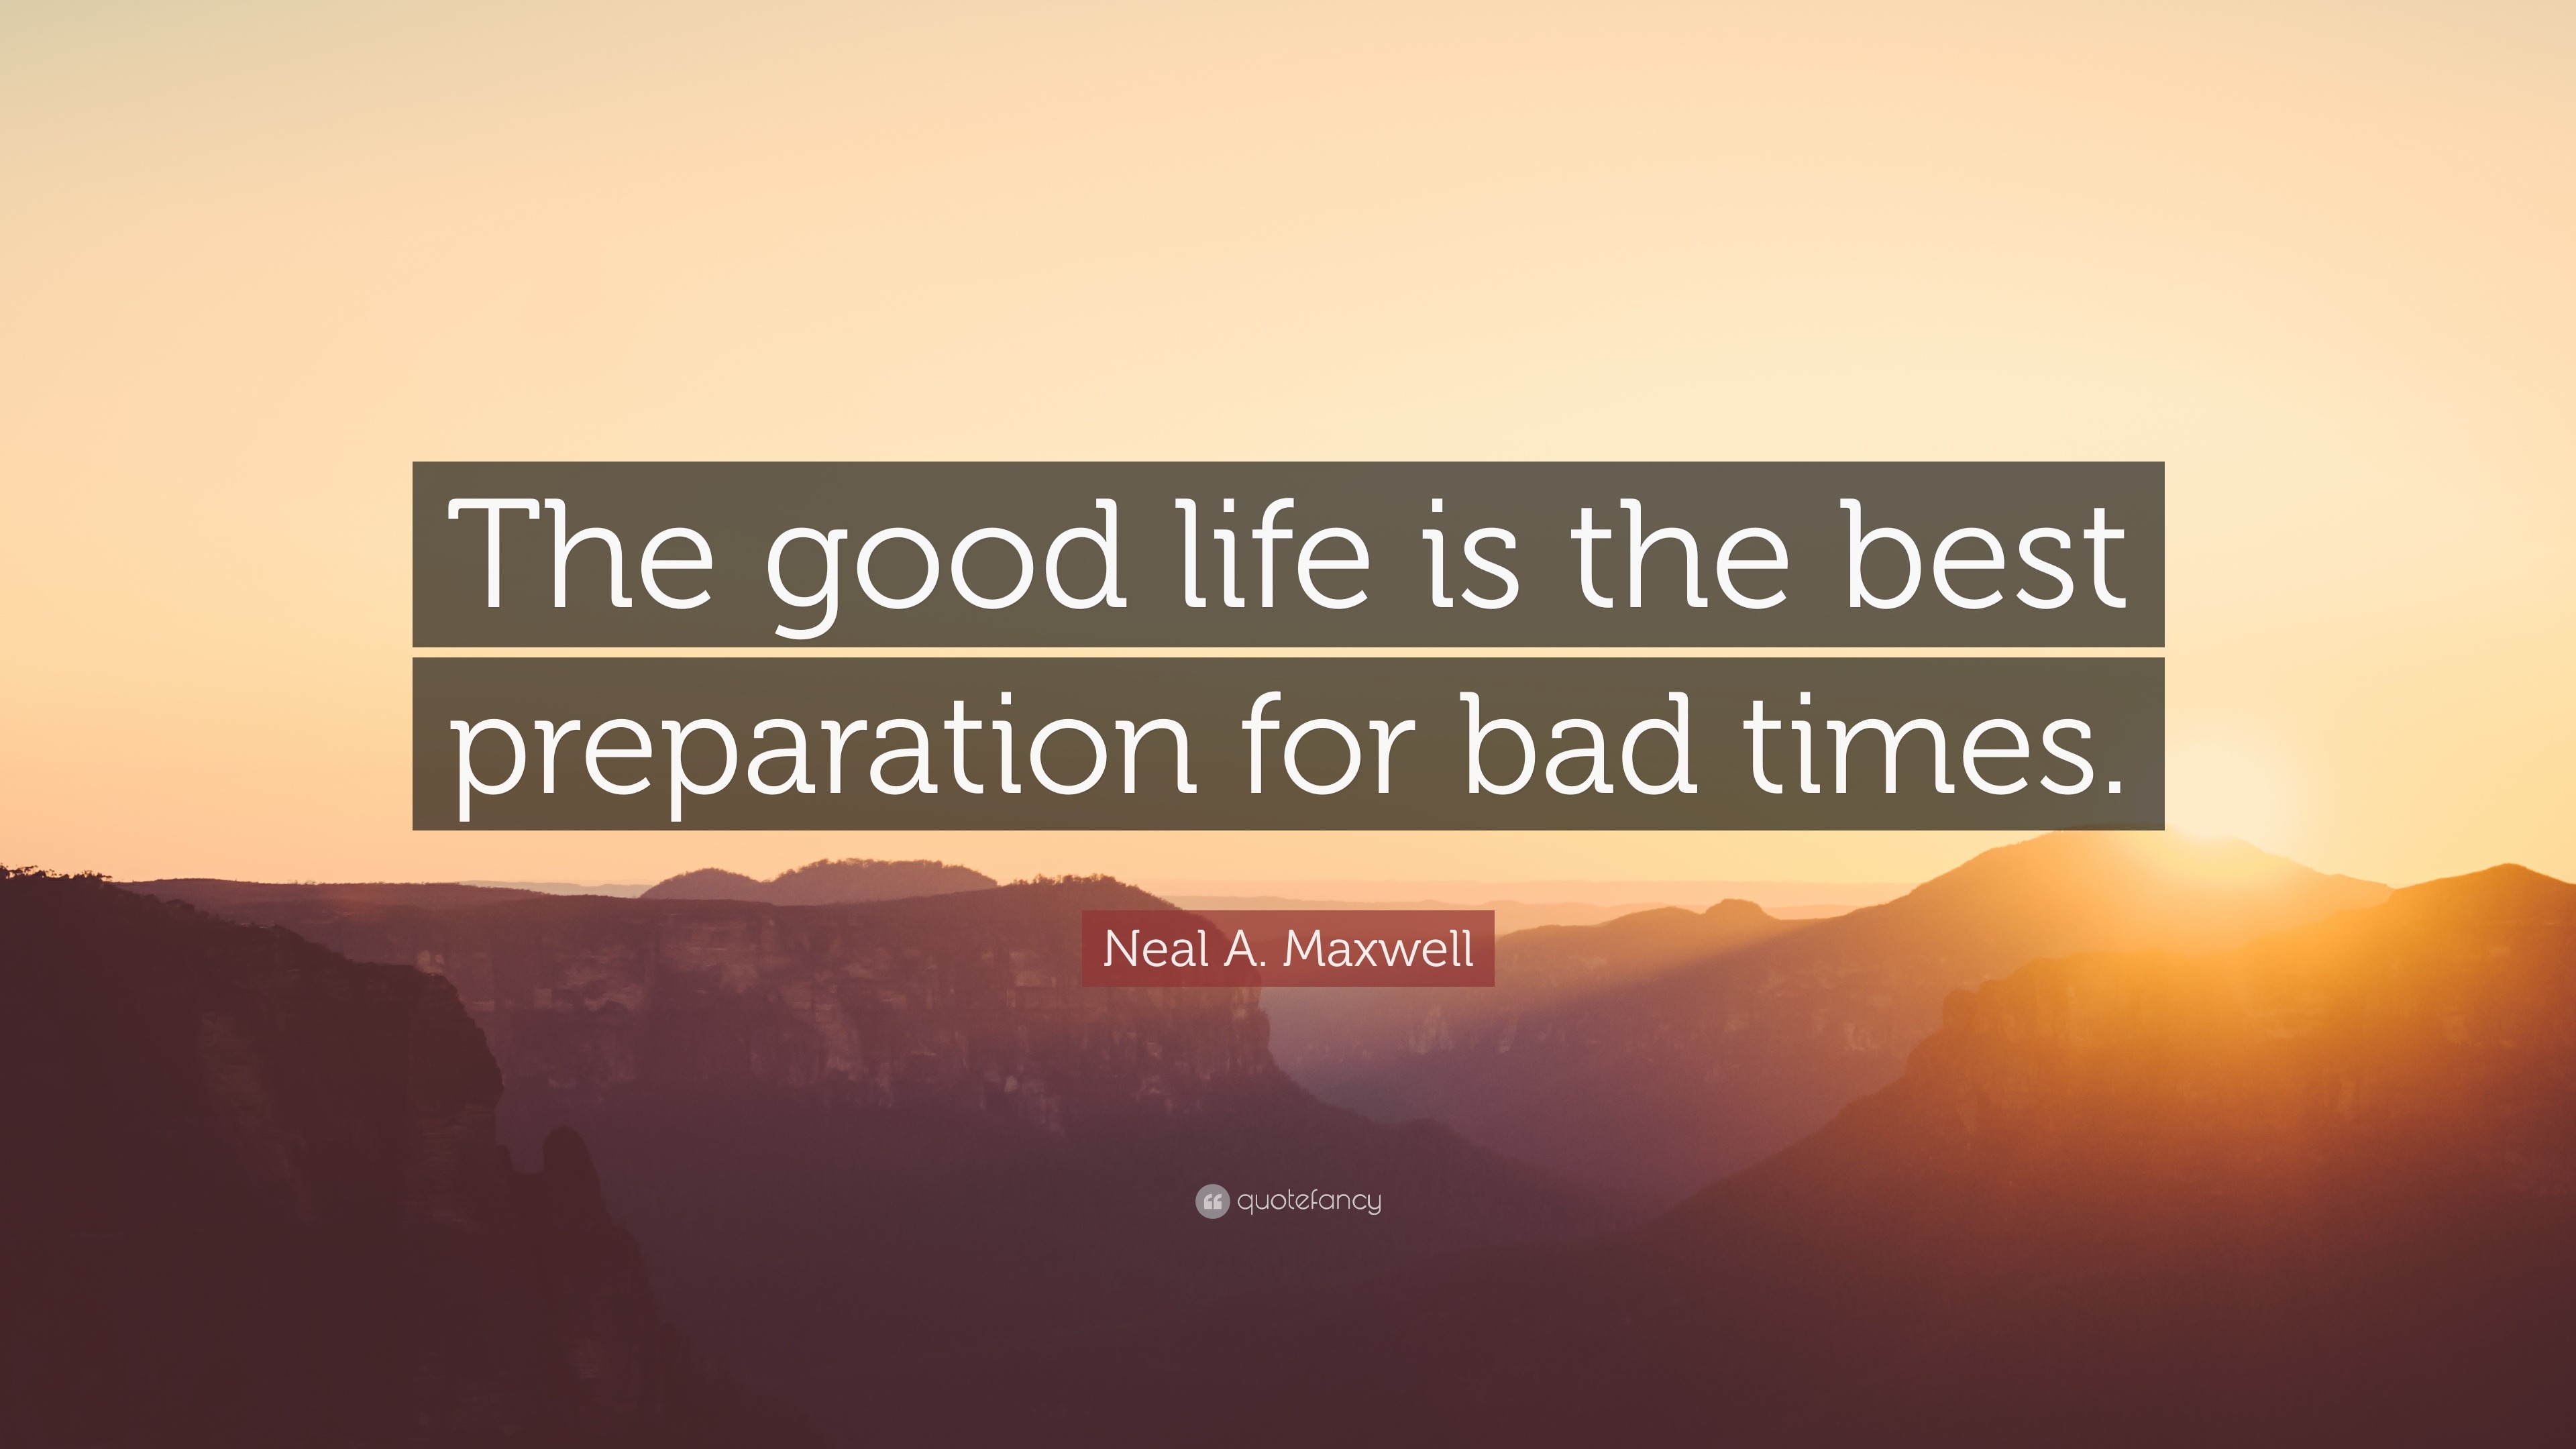 Neal A Maxwell Quote “The good life is the best preparation for bad